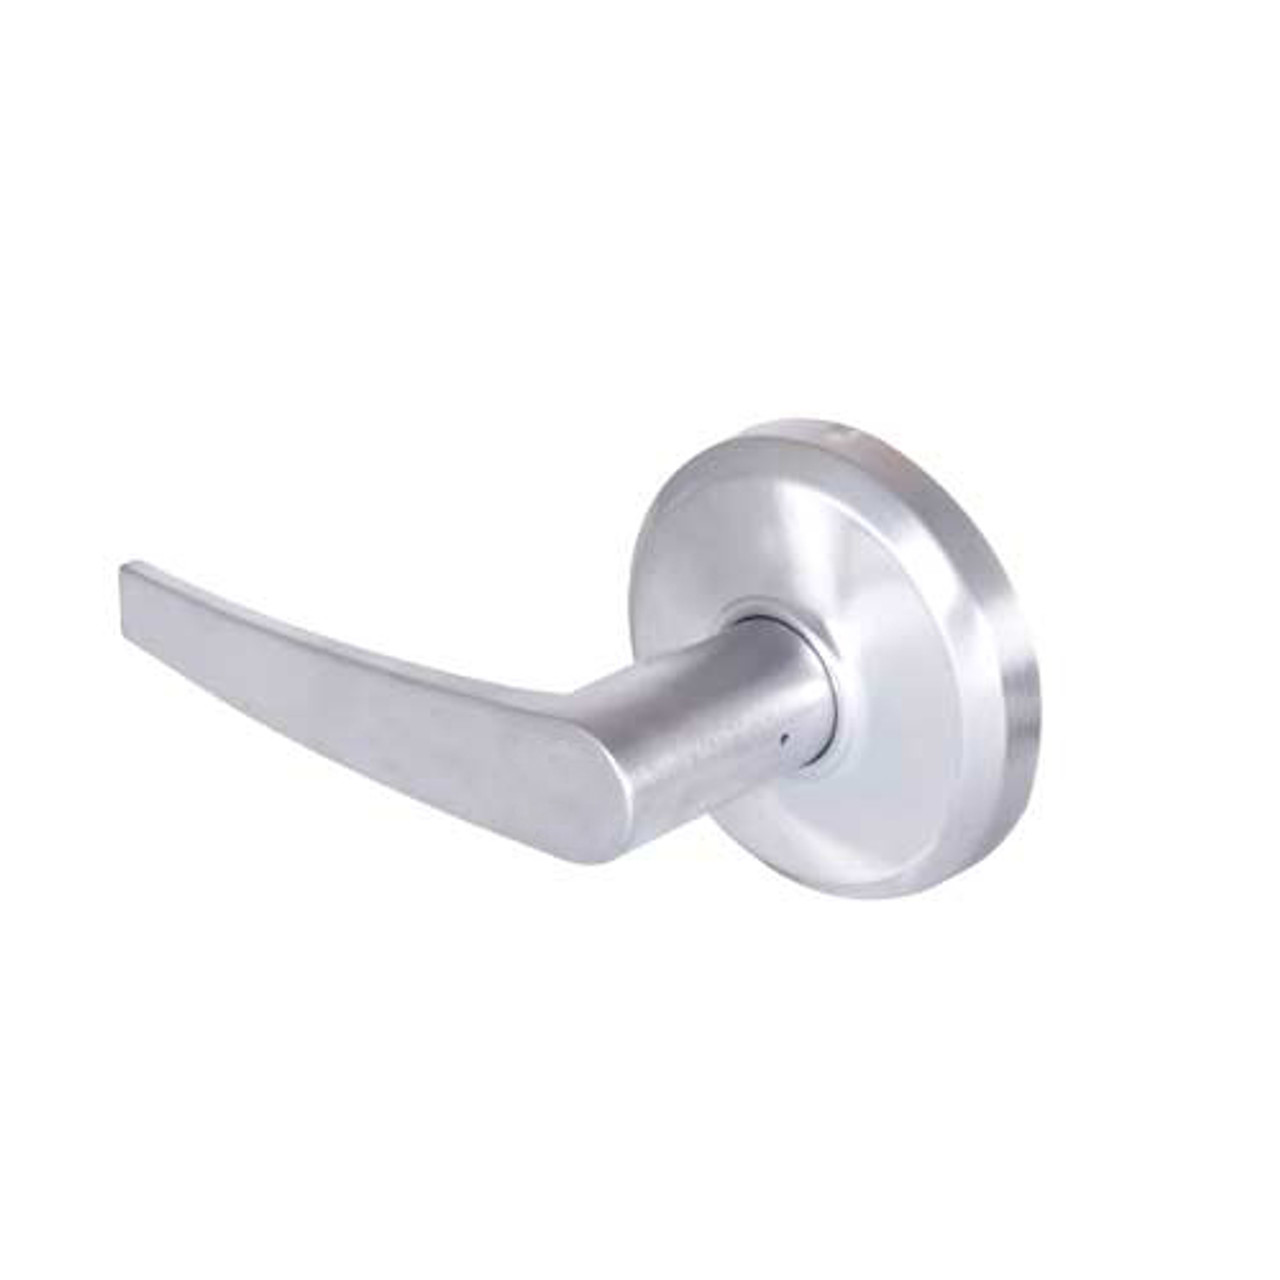 QCL235A625NS8NOS Stanley QCL200 Series Cylindrical Communicating Lock with Slate Lever in Bright Chrome Finish